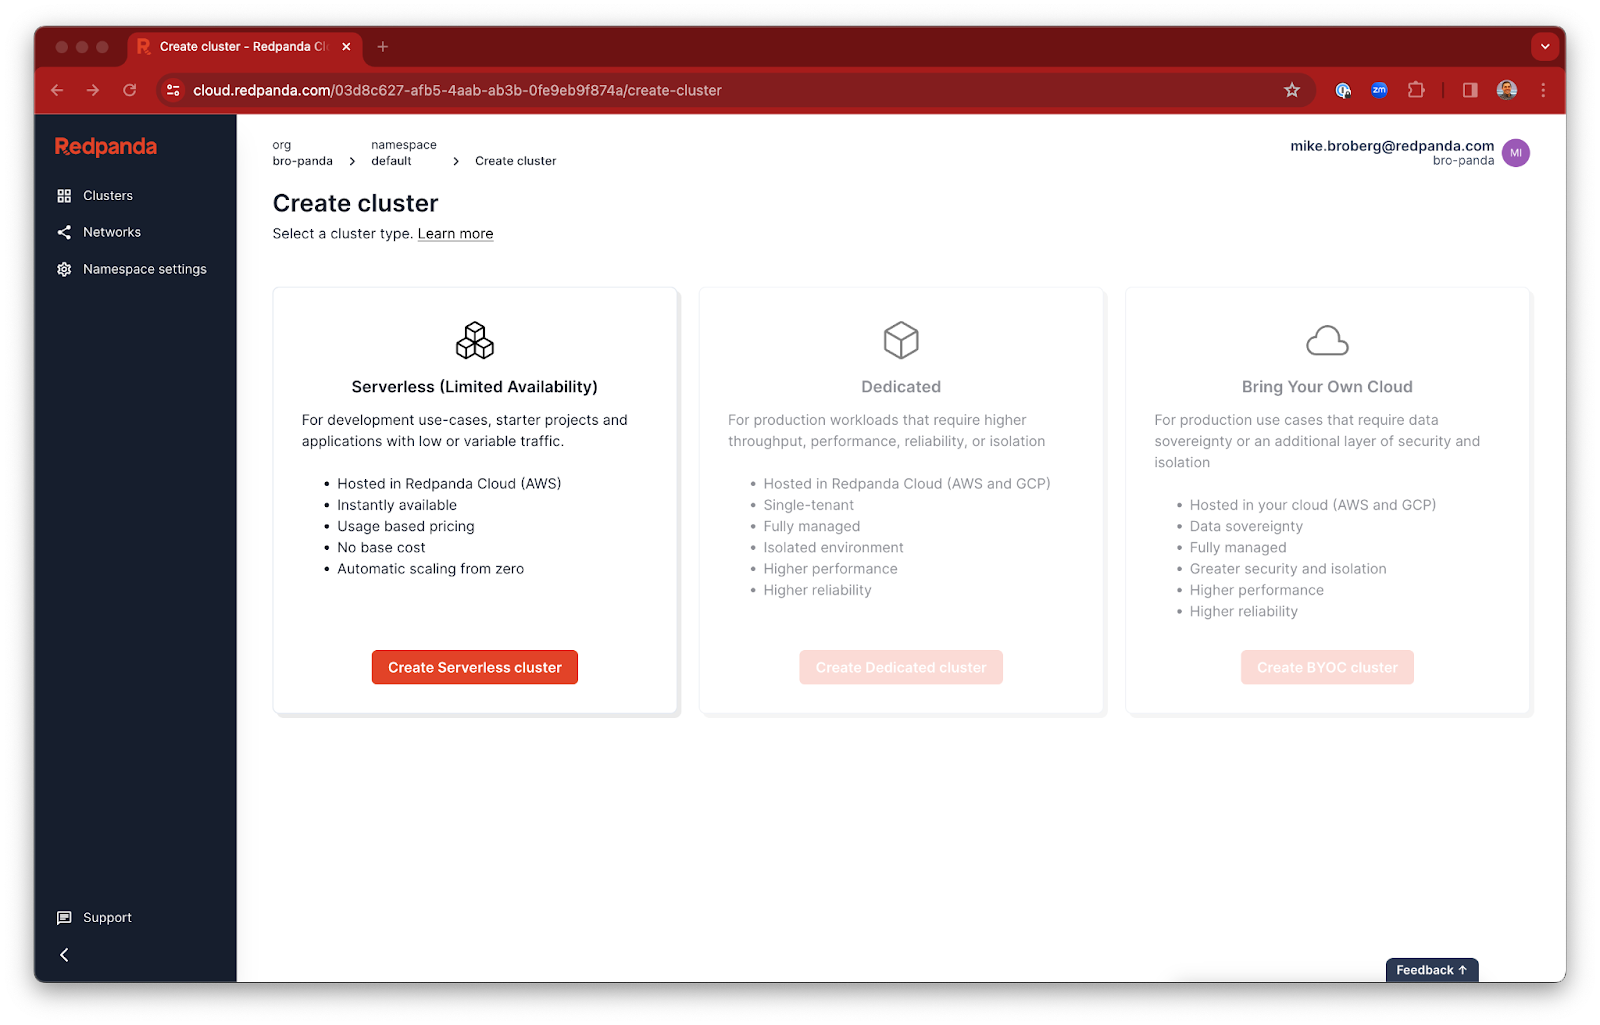 Create serverless Redpanda clusters on demand, or quickly upgrade to higher-tier Redpanda Cloud options